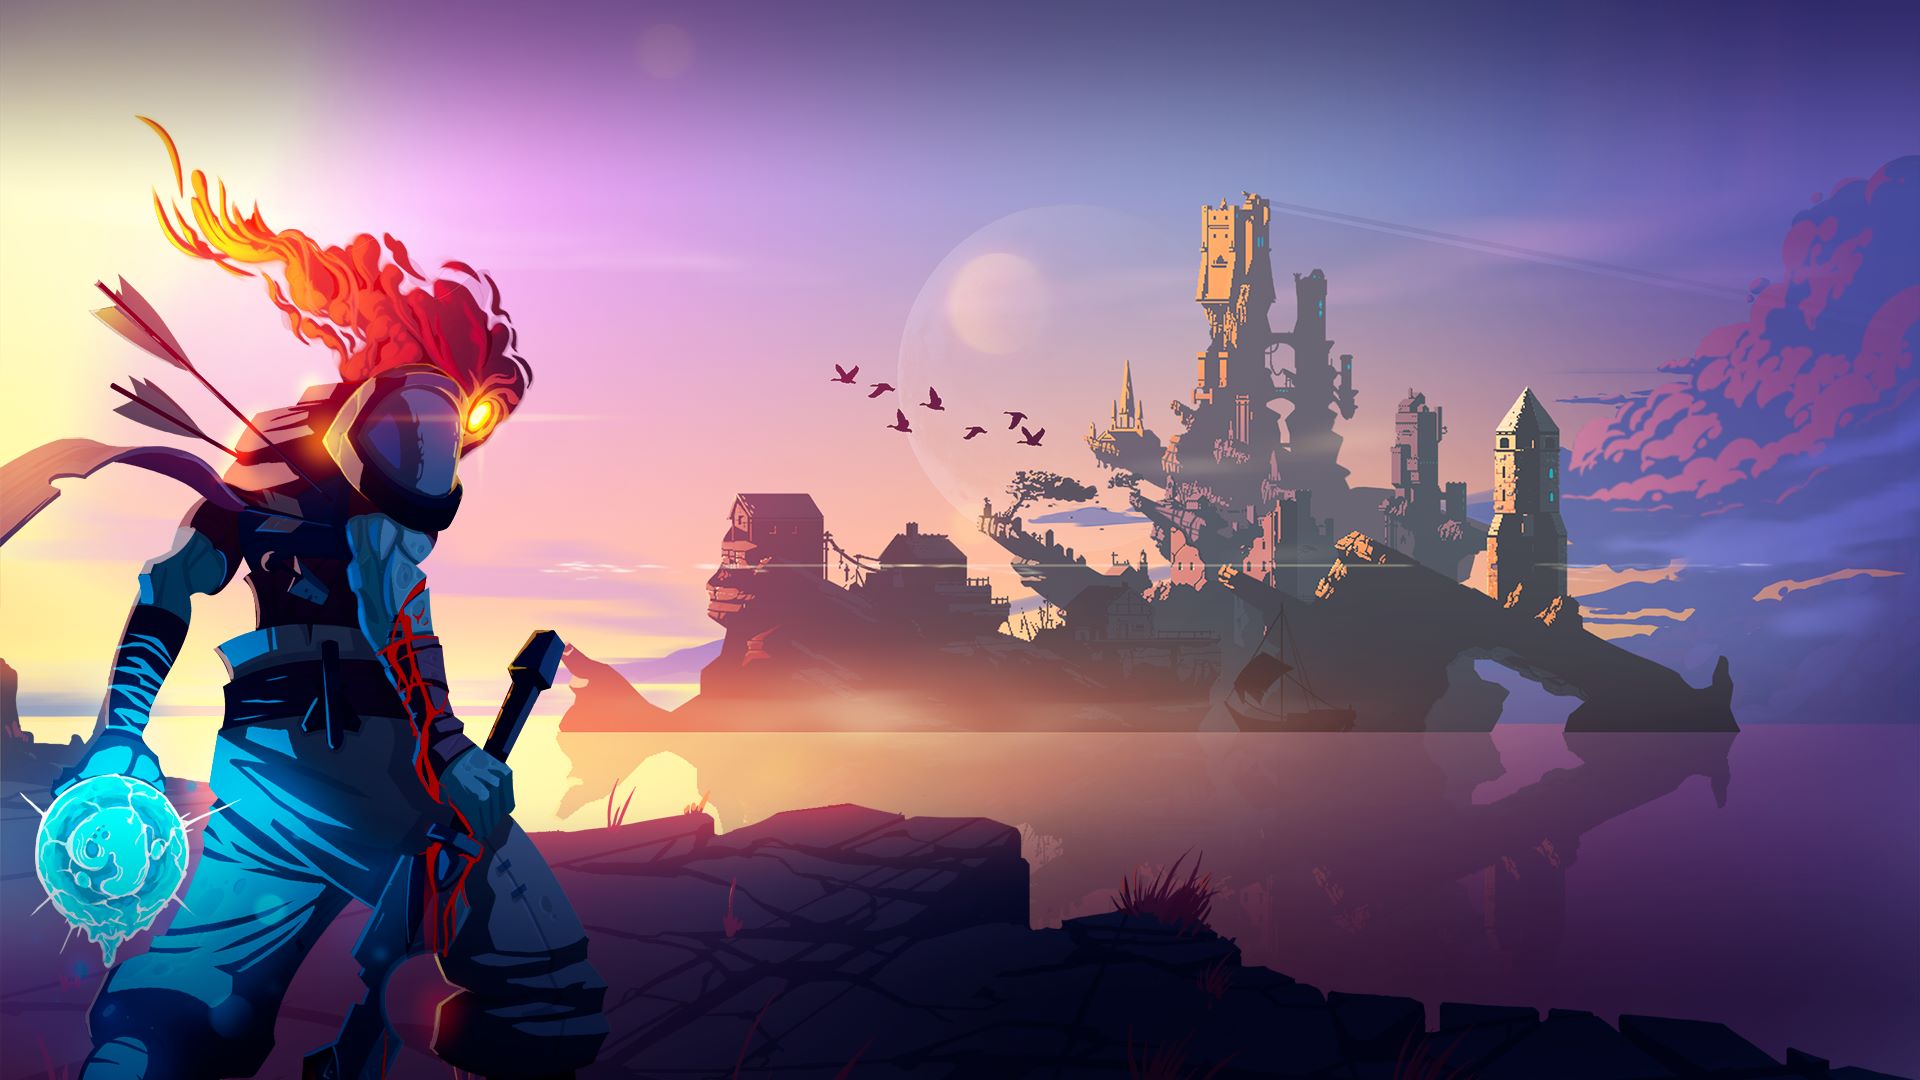 New Dead Cells and Hades 2 prove roguelikes will dominate 2023